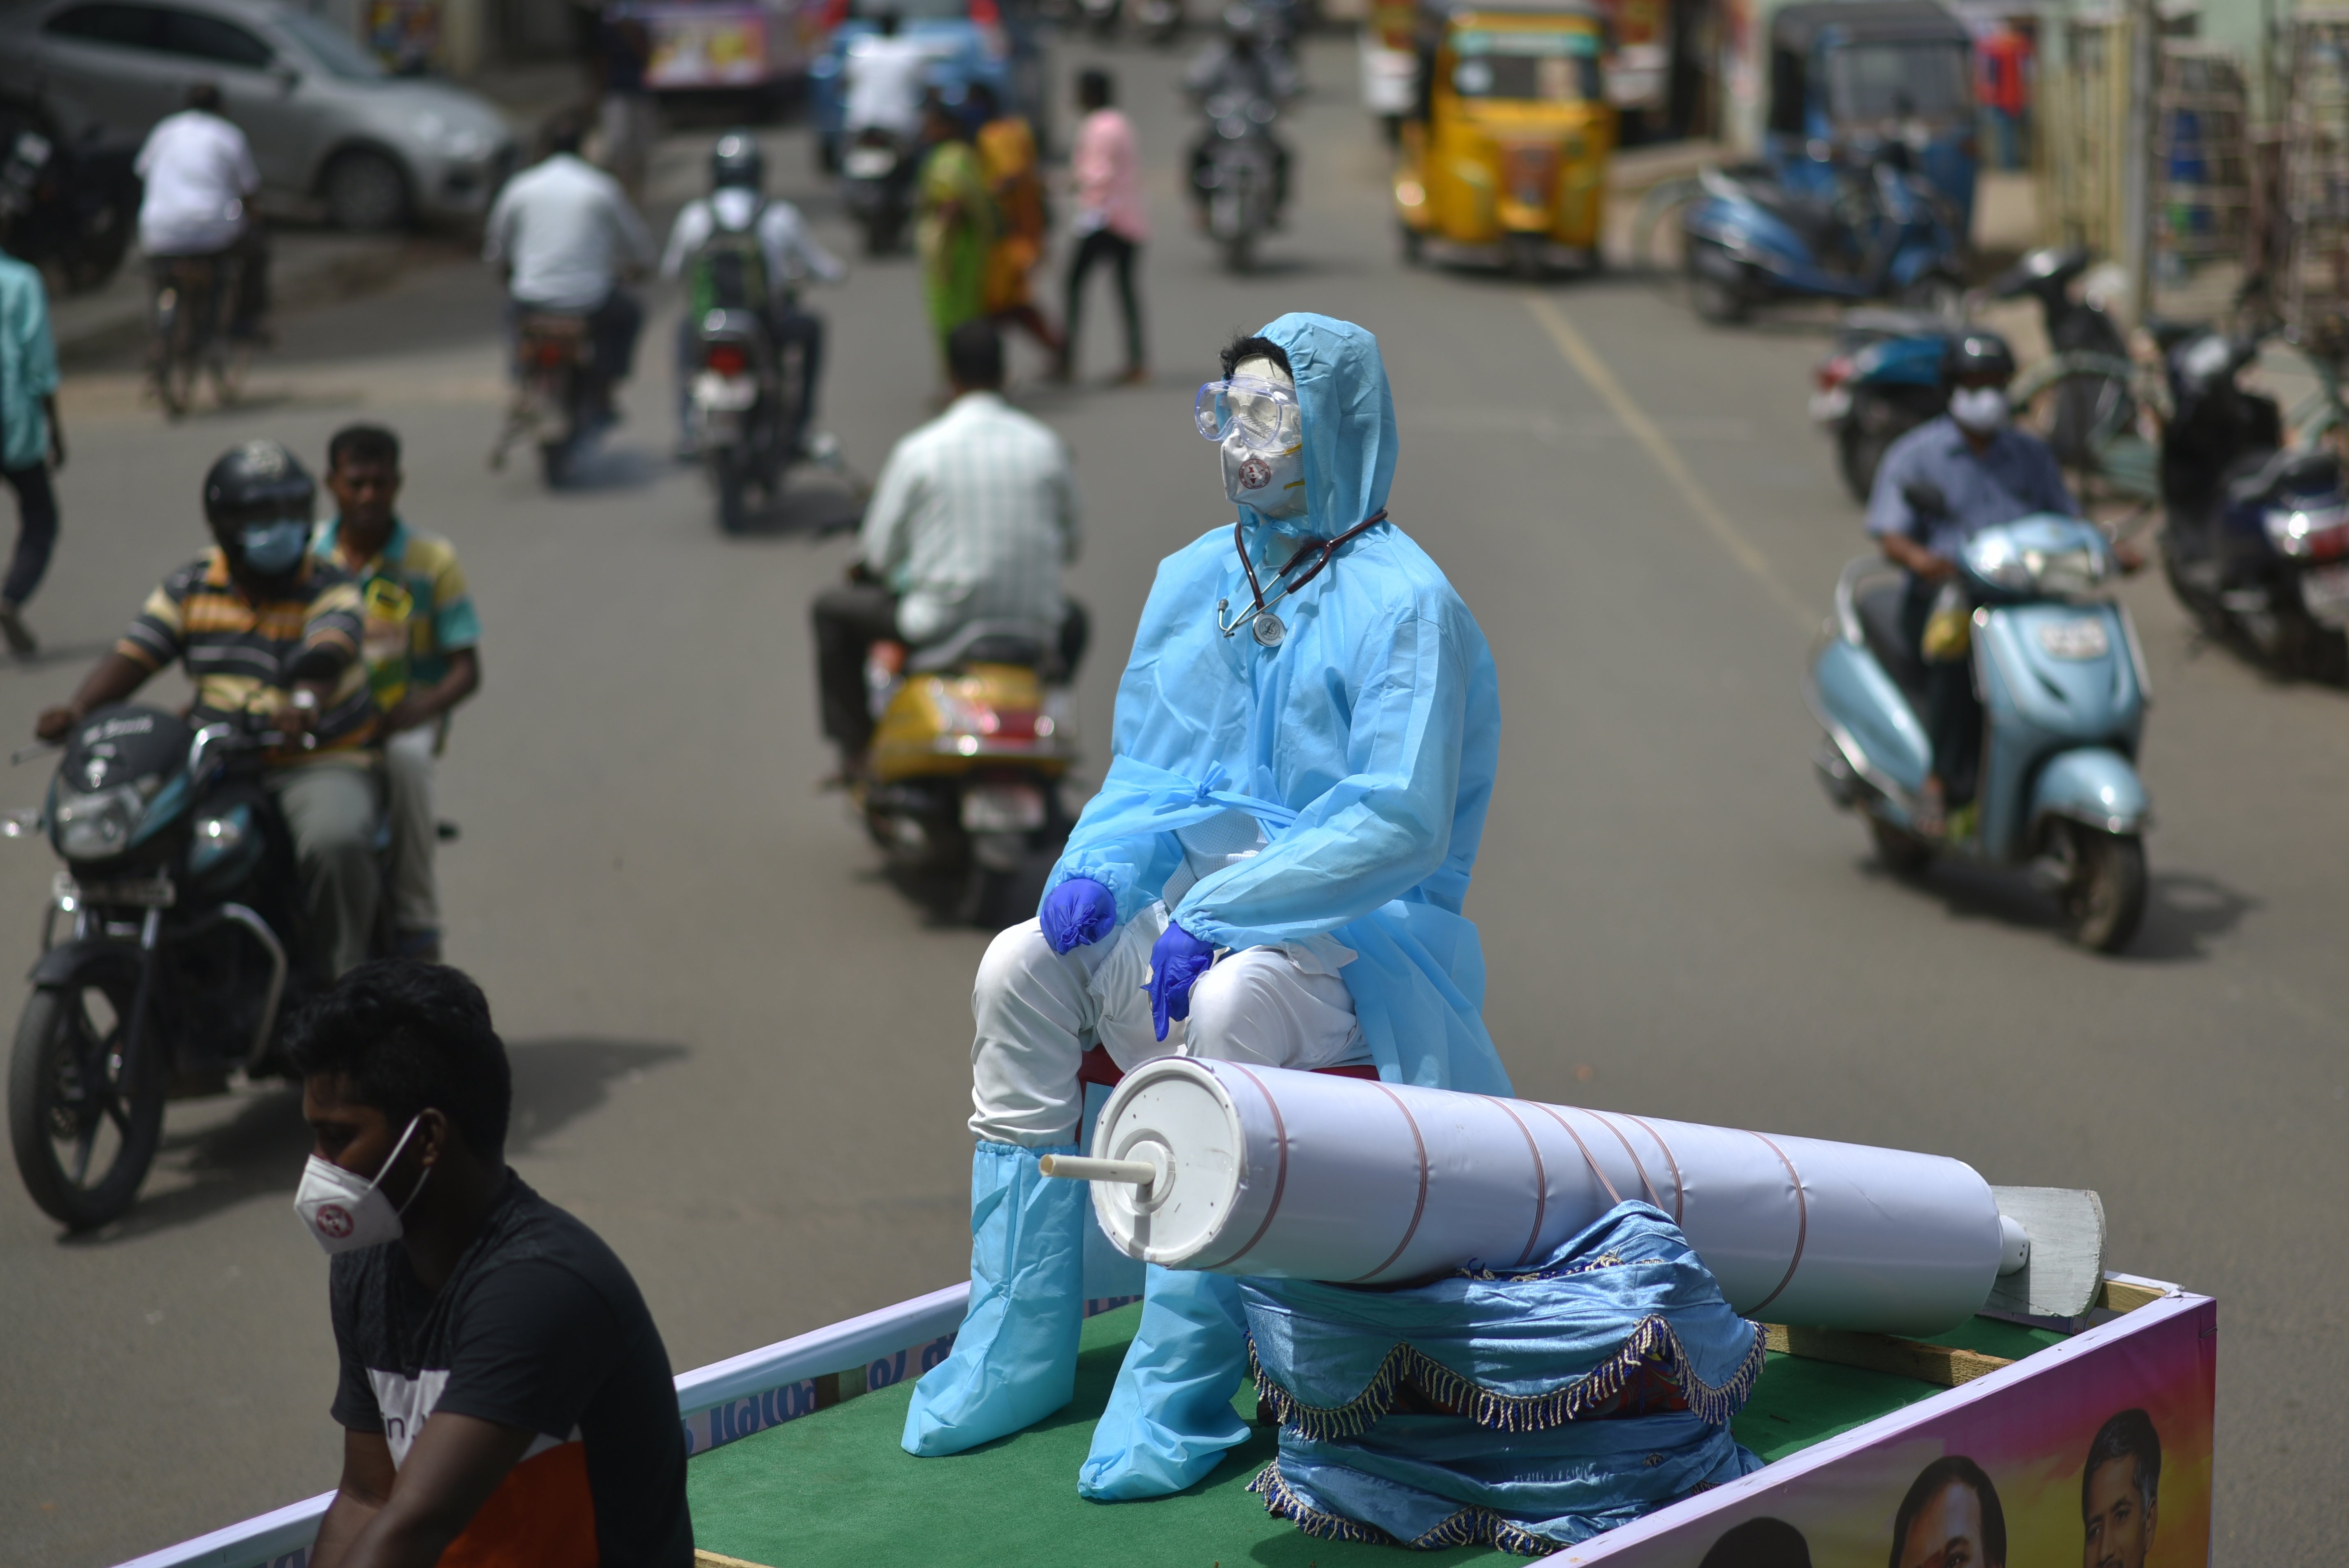 NGO volunteers showcase a mannequin dressed in PPE on a cycle rickshaw during an awareness campaign against the spread of Covid-19 in Chennai, India